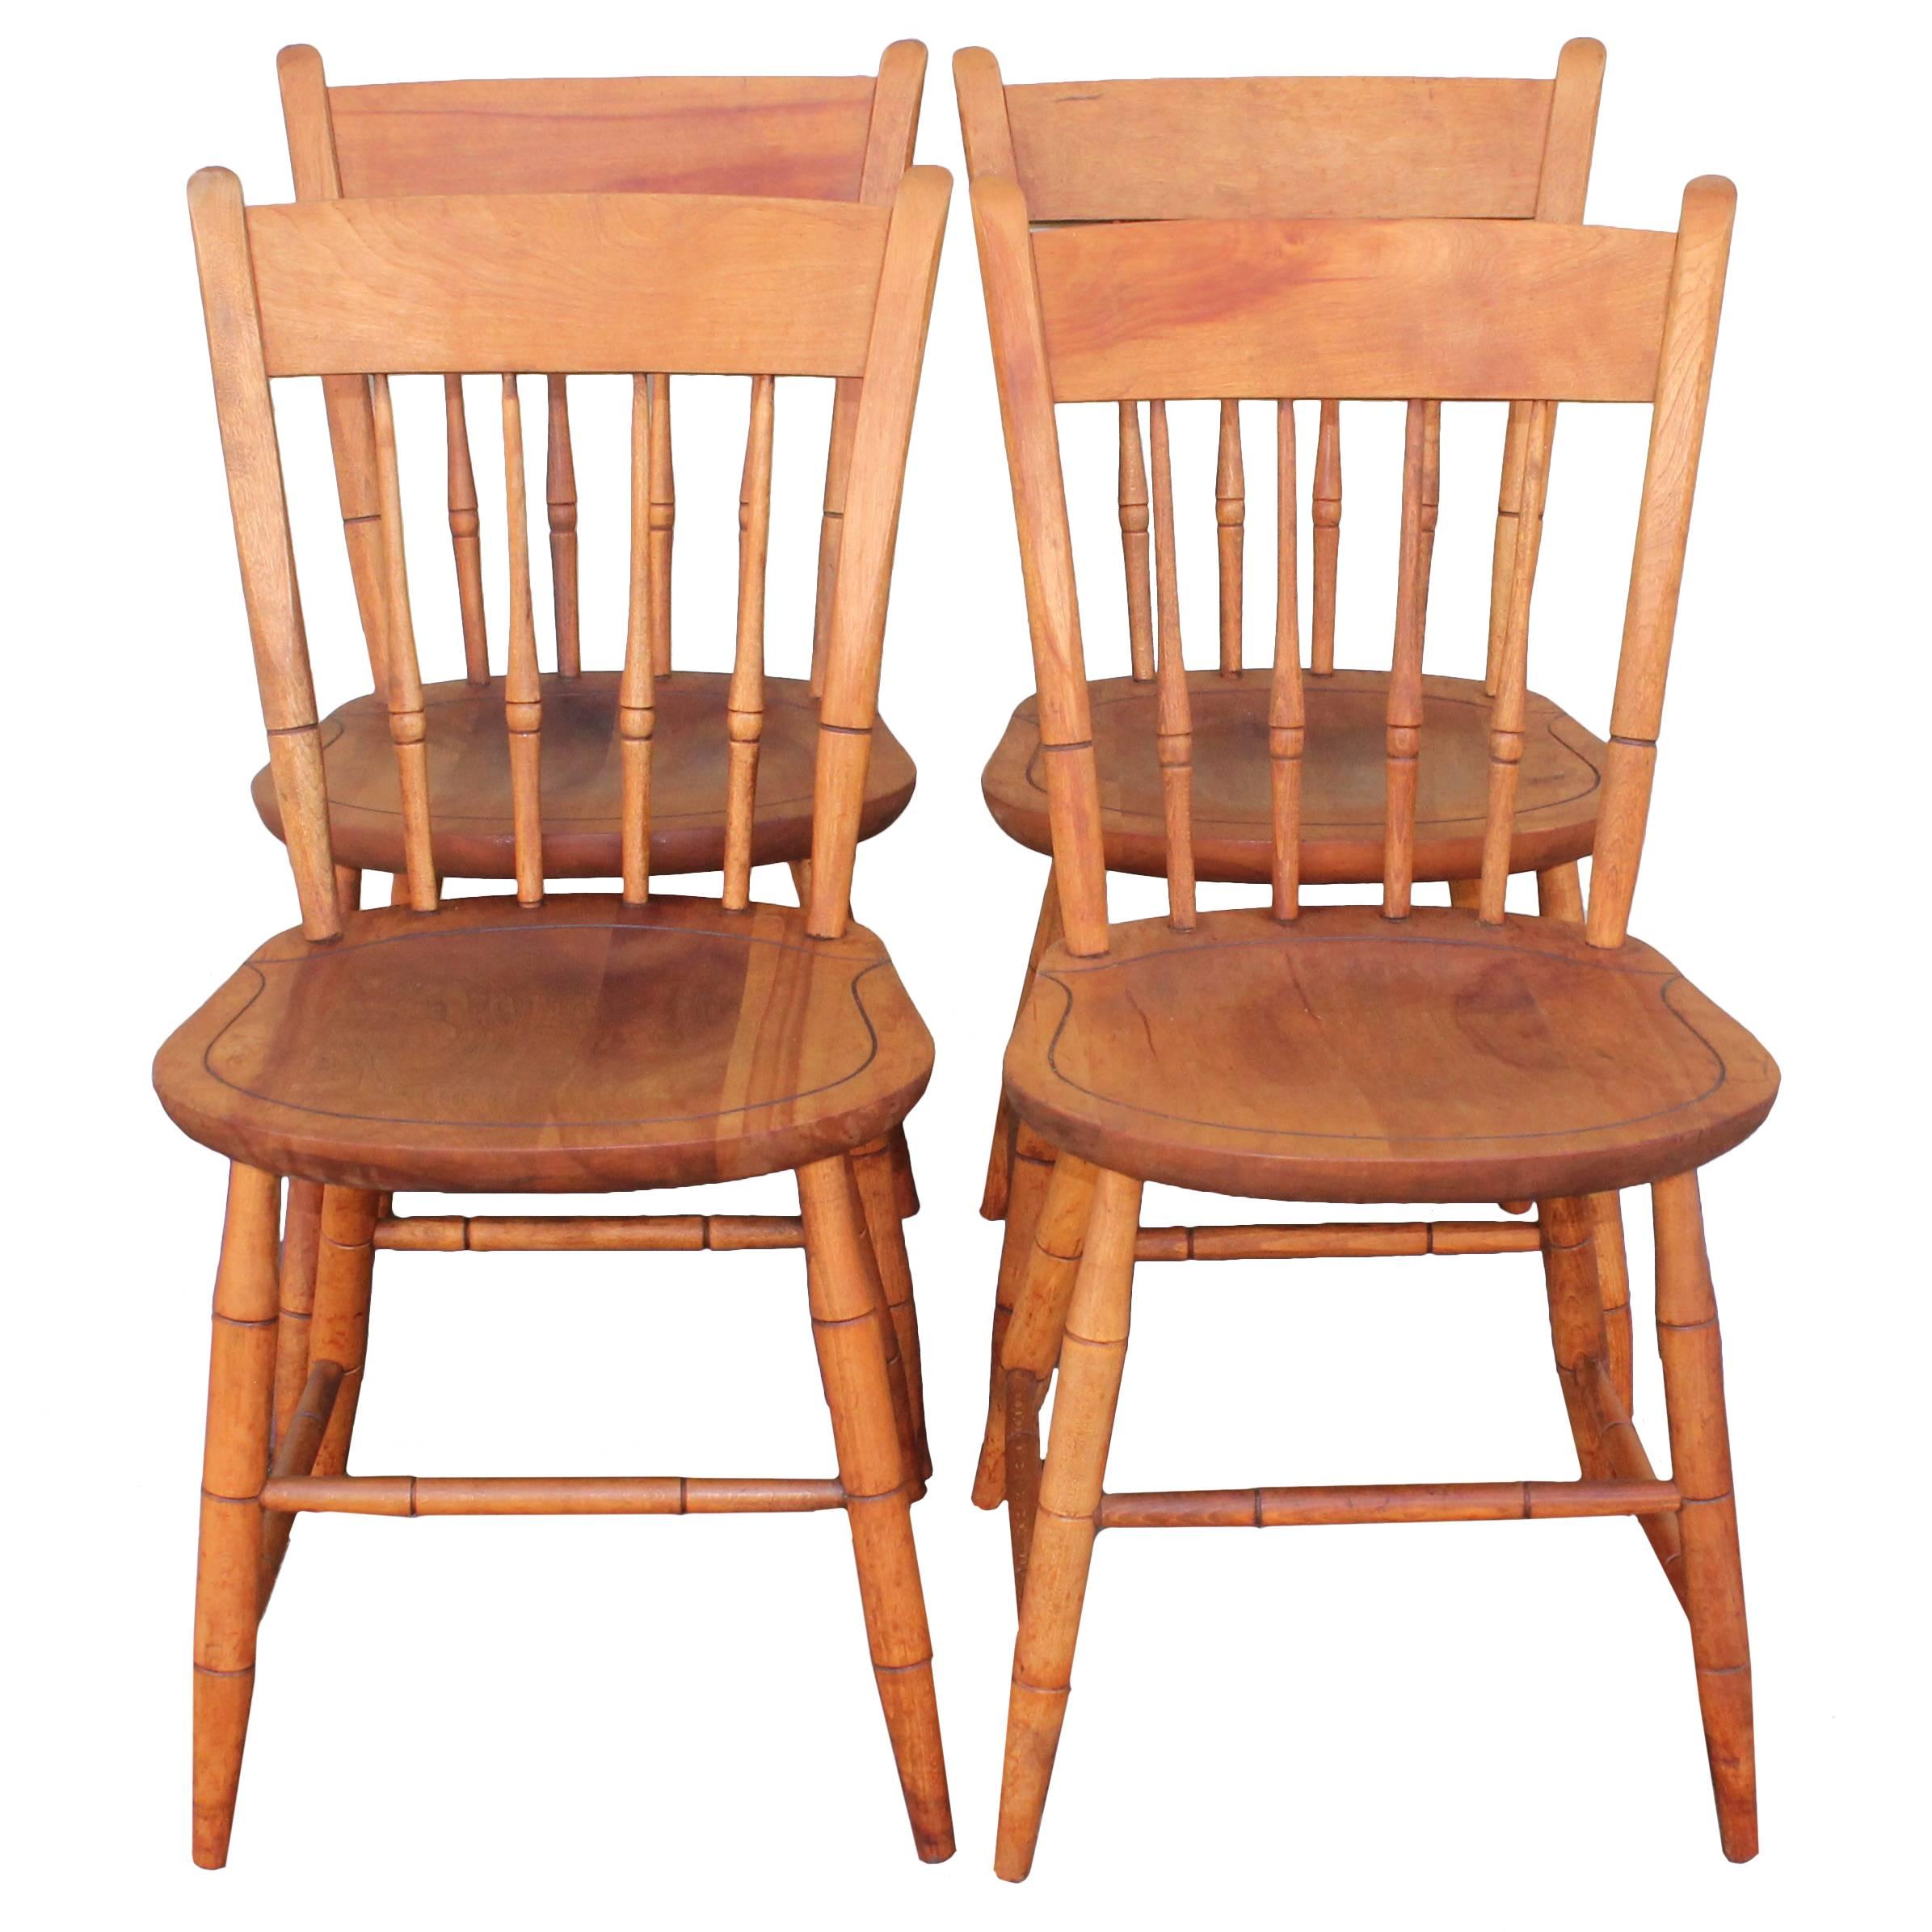 Signed Nichols and Stone Thumb Back Windsor Chairs / Set of Four